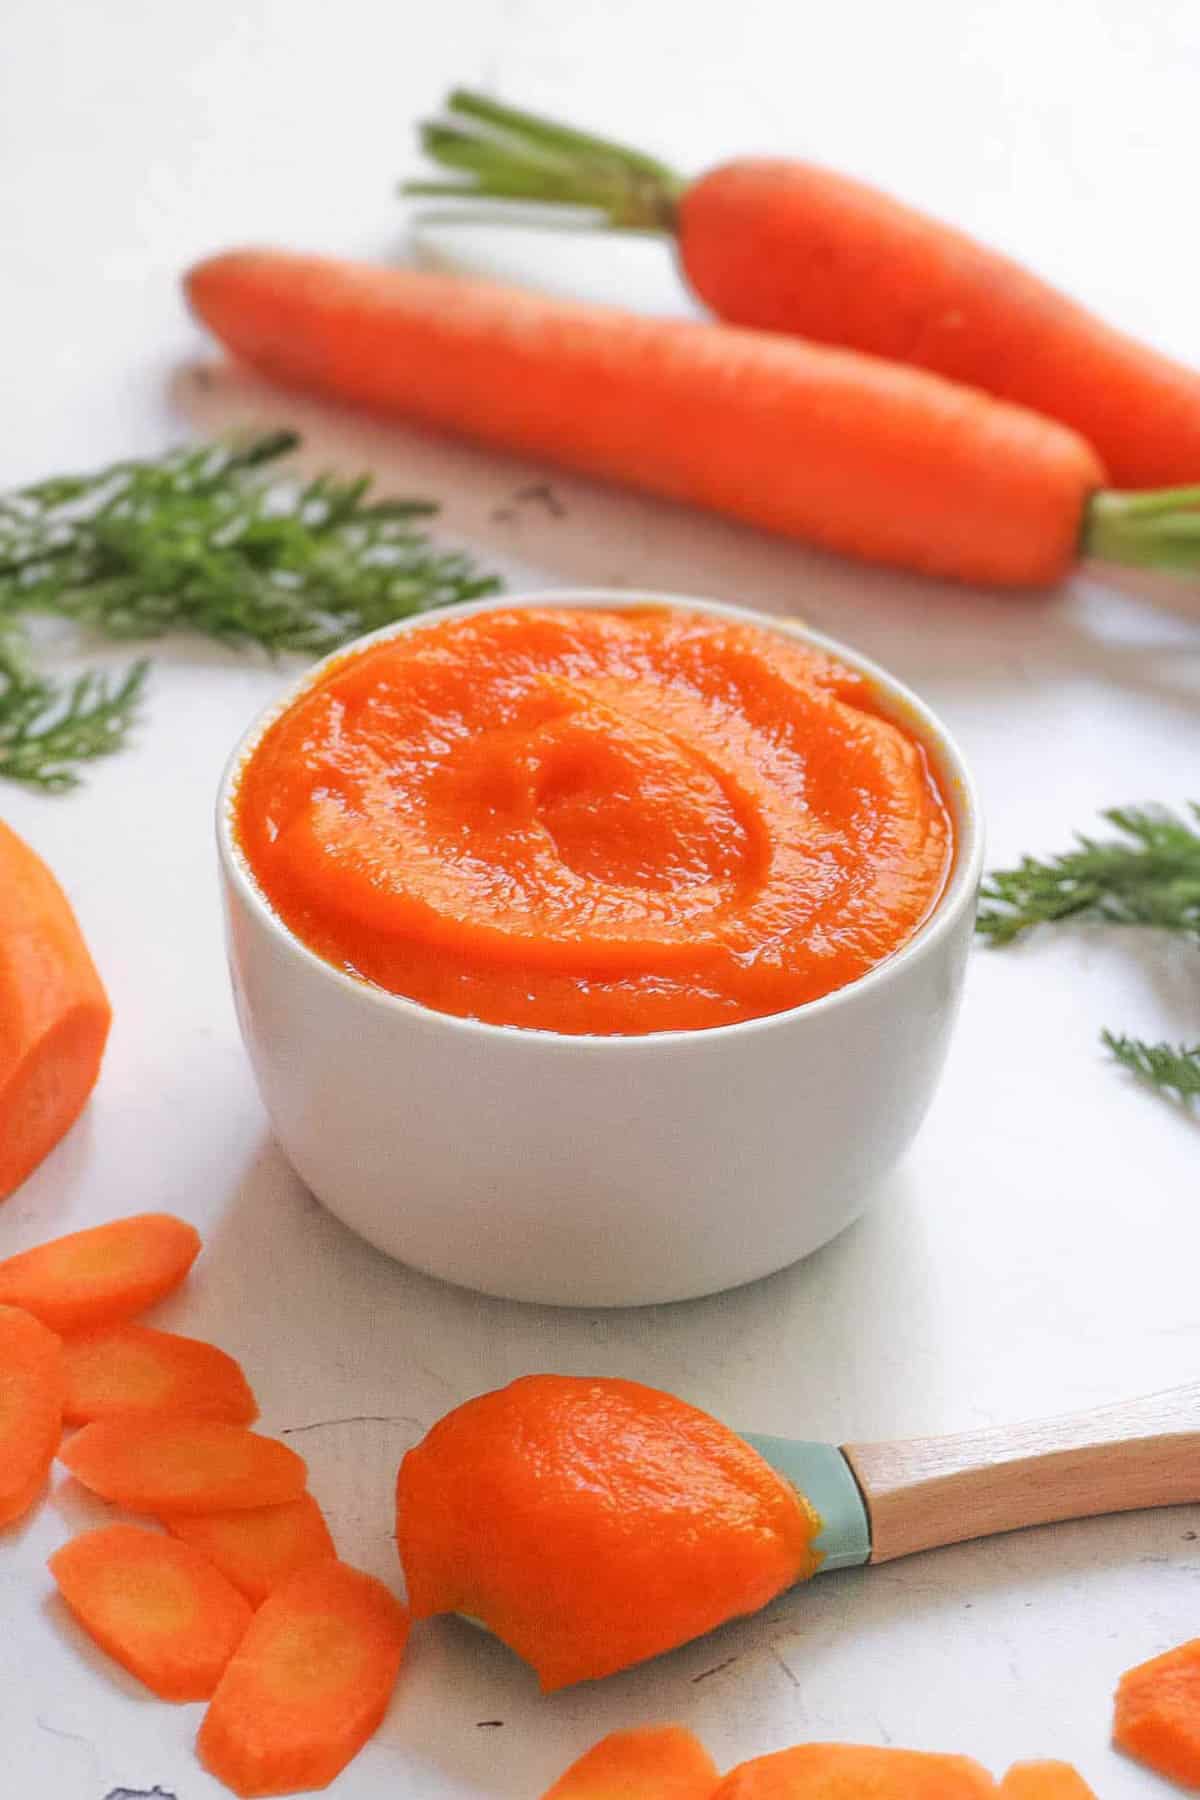 How to make carrot puree for baby: carrot baby food served in a white bowl.